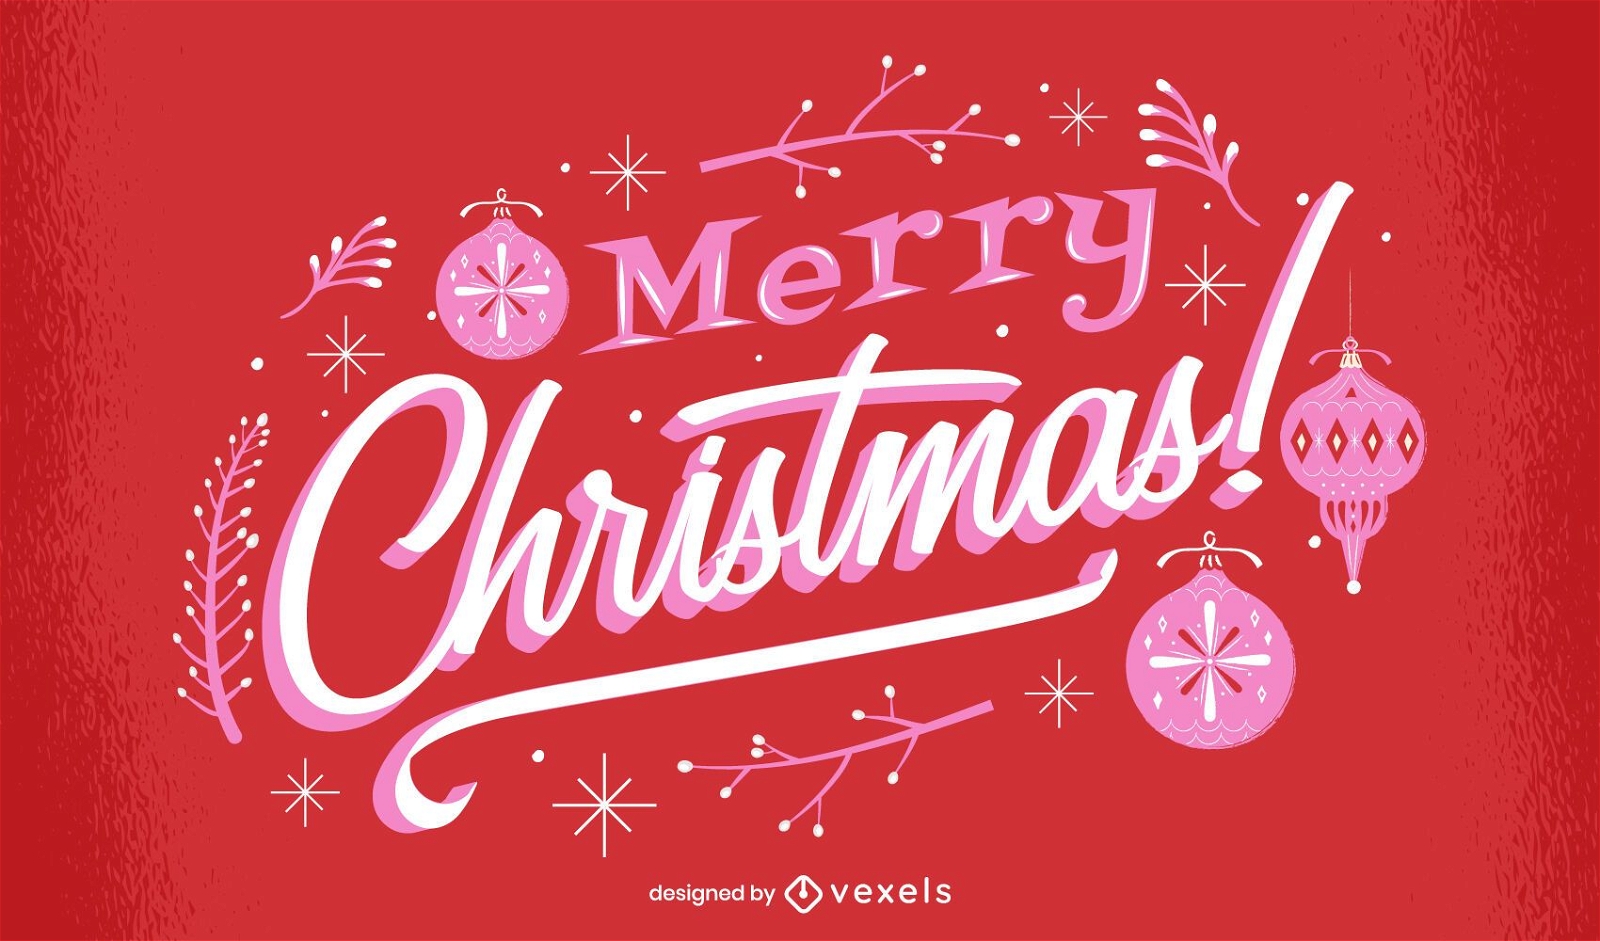 Merry christmas sparkly lettering design